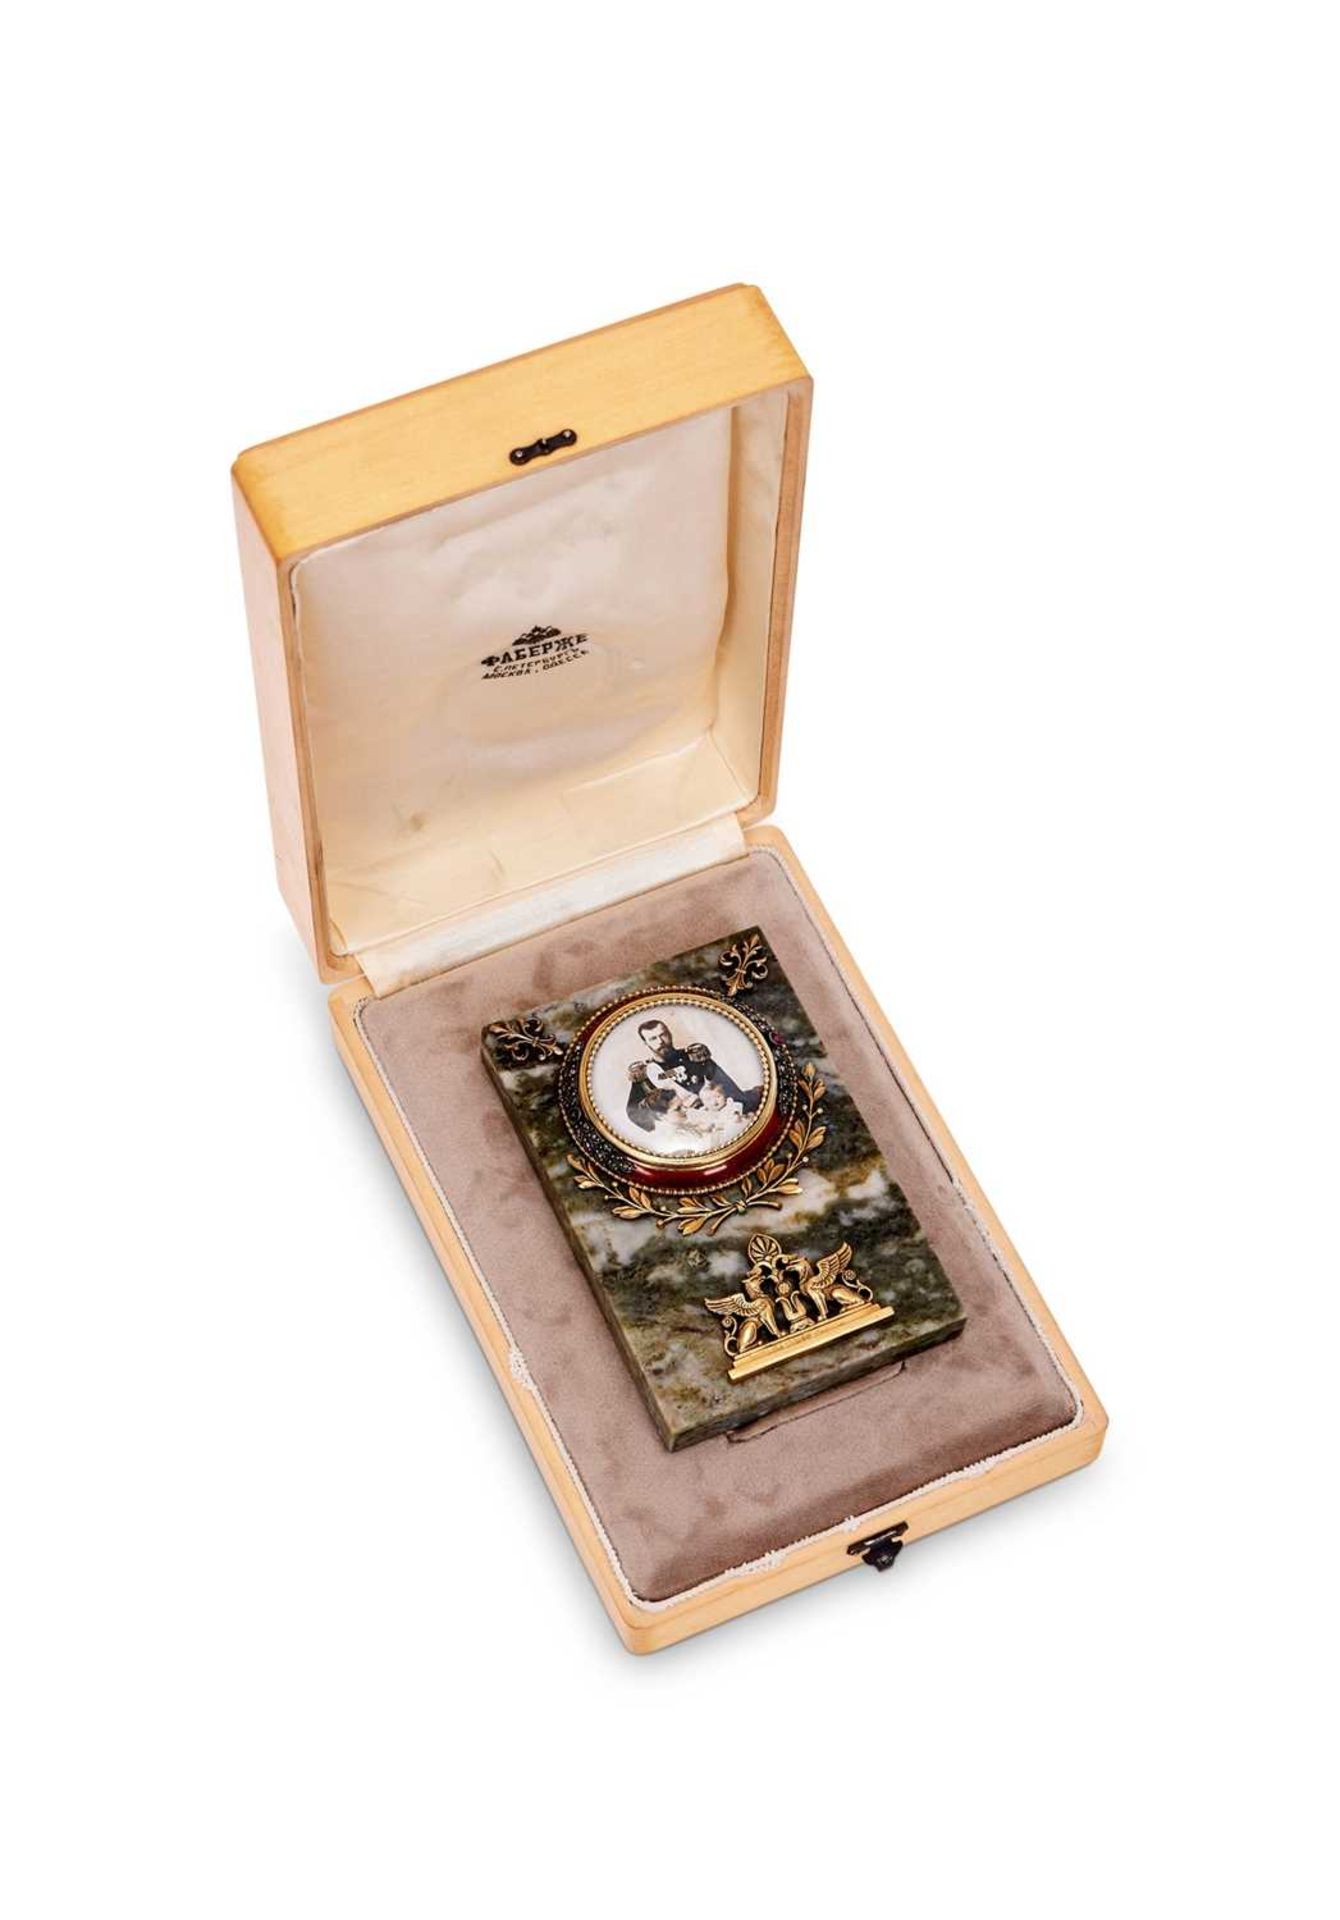 A FABERGE STYLE DIAMOND SET, MARBLE AND ENAMEL PHOTOGRAPH FRAME - Image 2 of 2